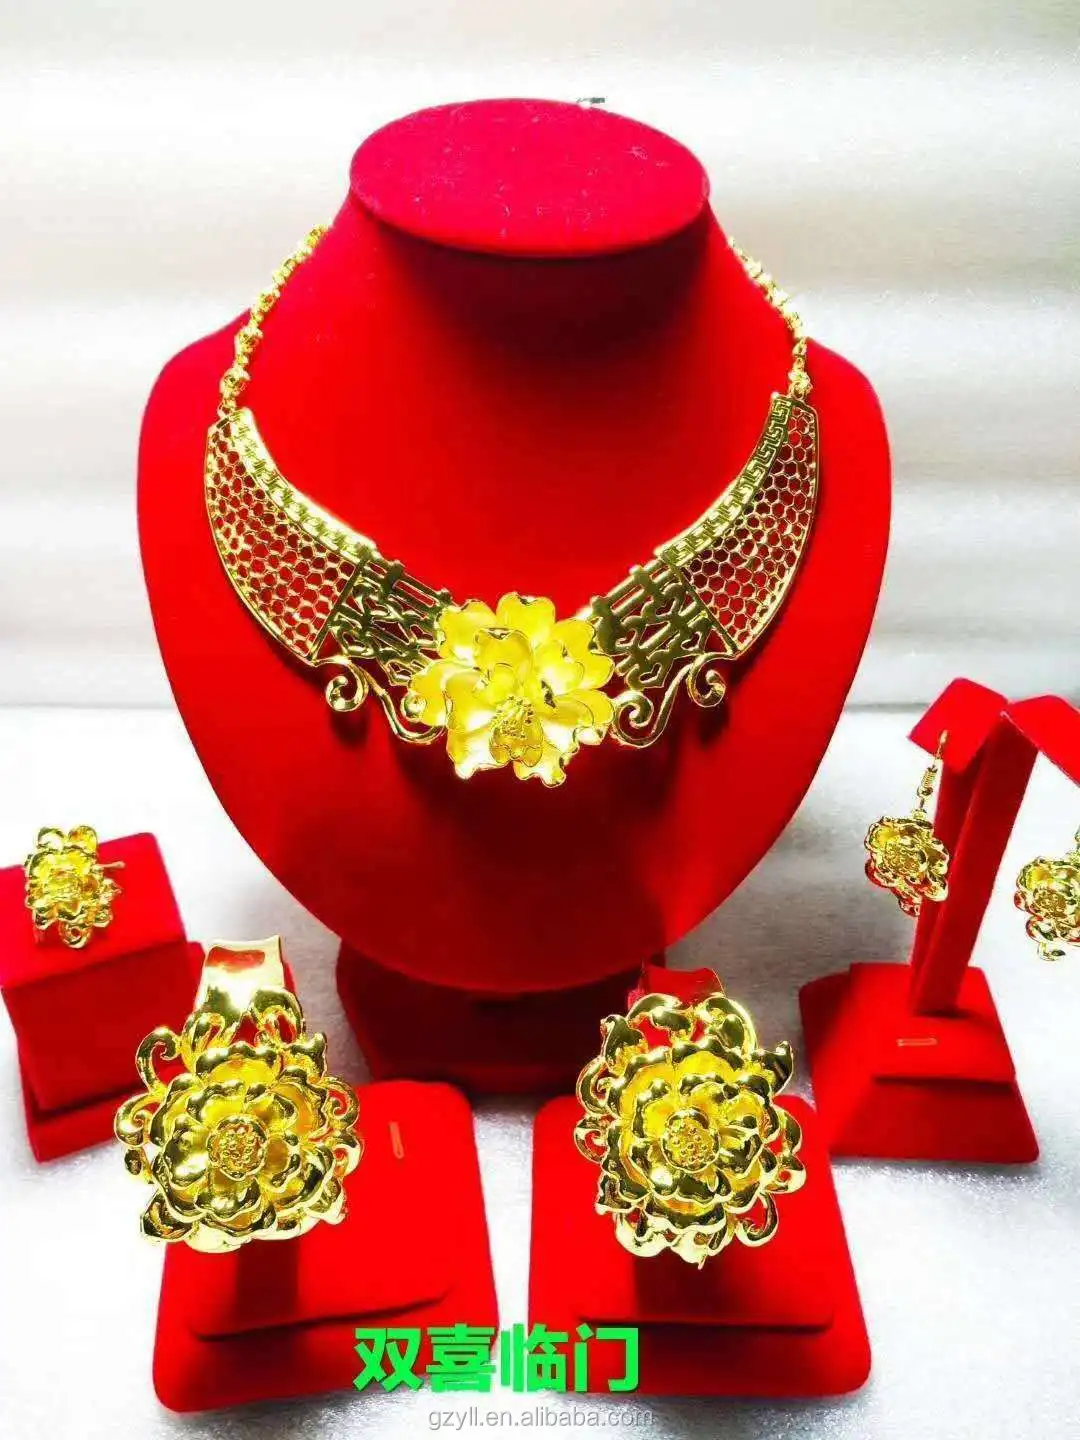 Traditional Chinese Jewelry - Vibrant traditional Chinese jewelry with  intricate details - CleanPNG / KissPNG